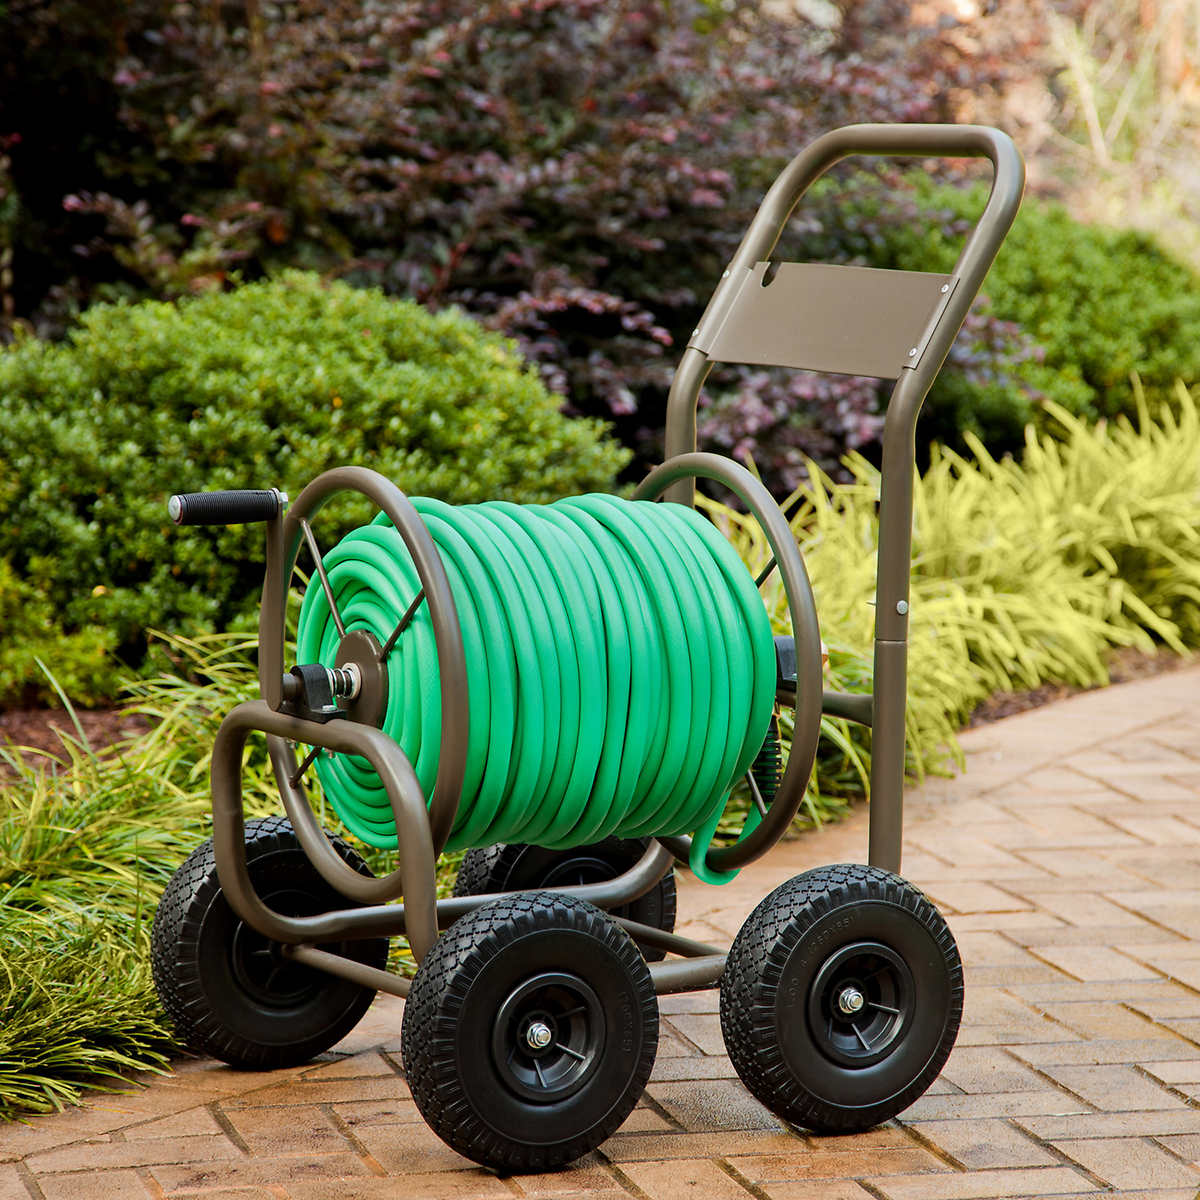 Sold At Auction: Garden Hose Reel Cart, Tires Need Fixed, 56% OFF